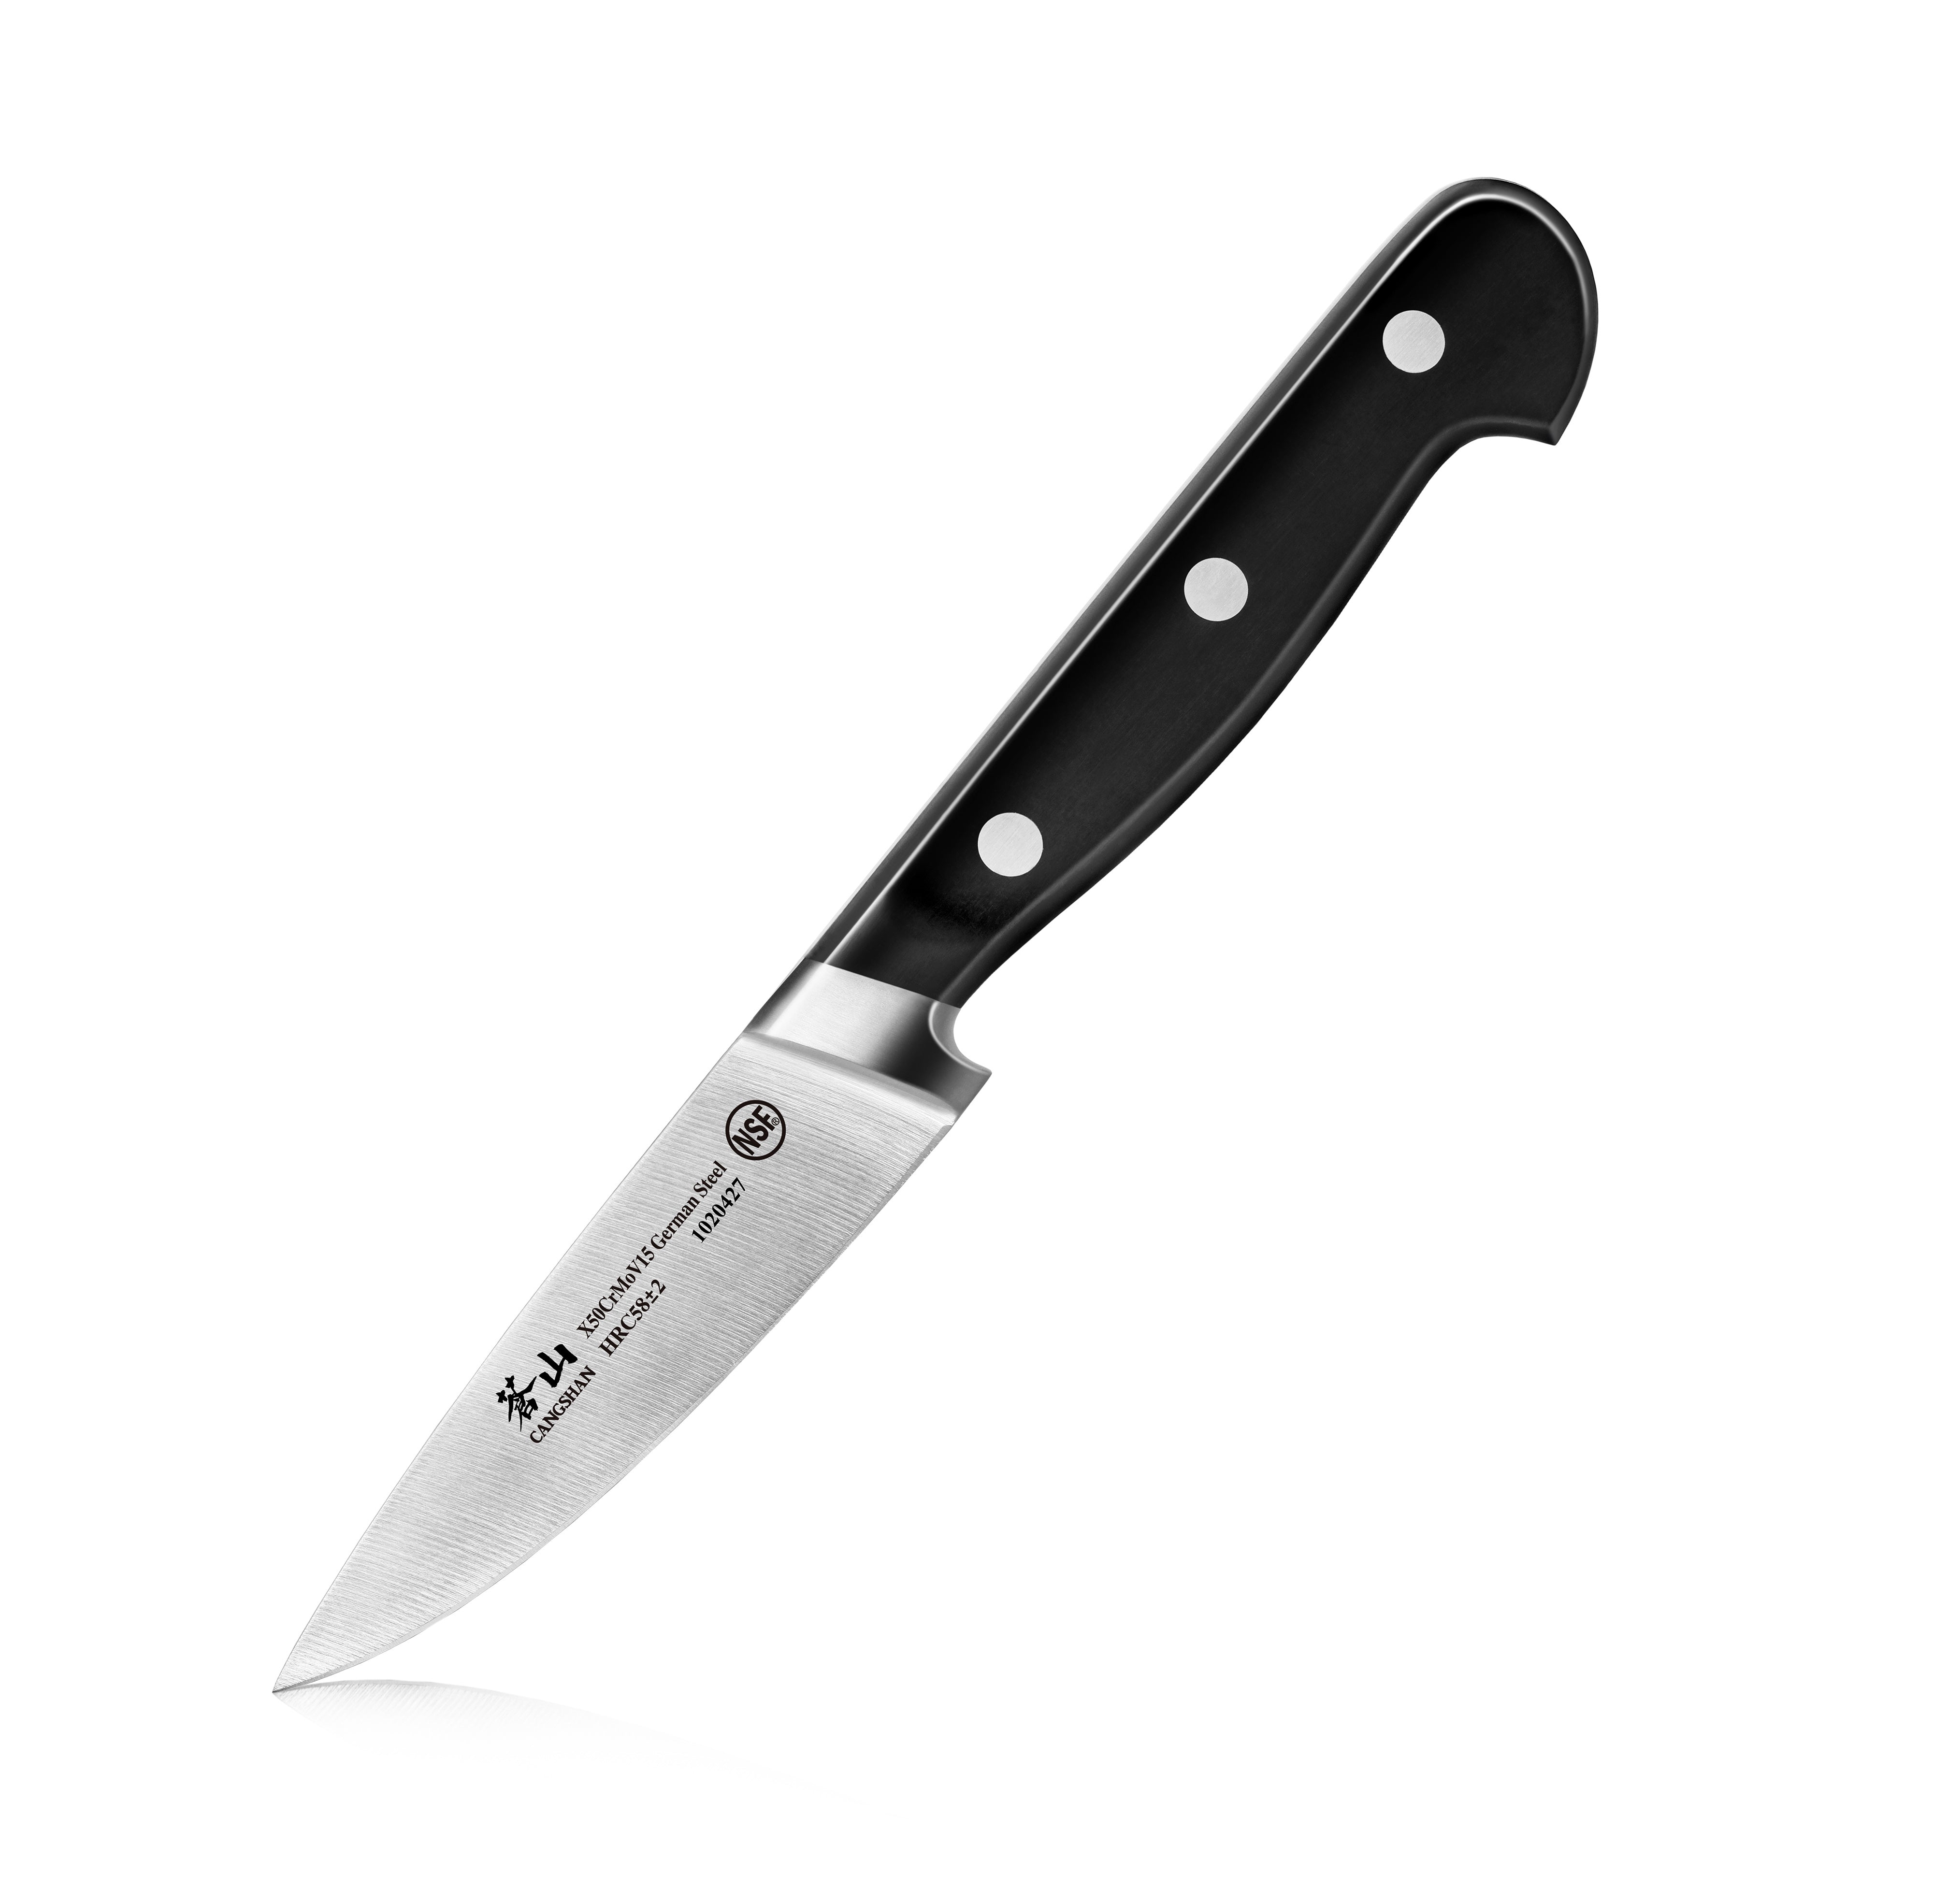 V2 Series 3.5-Inch Paring Knife, Forged German Steel, 1020427 – Cangshan  Cutlery Company